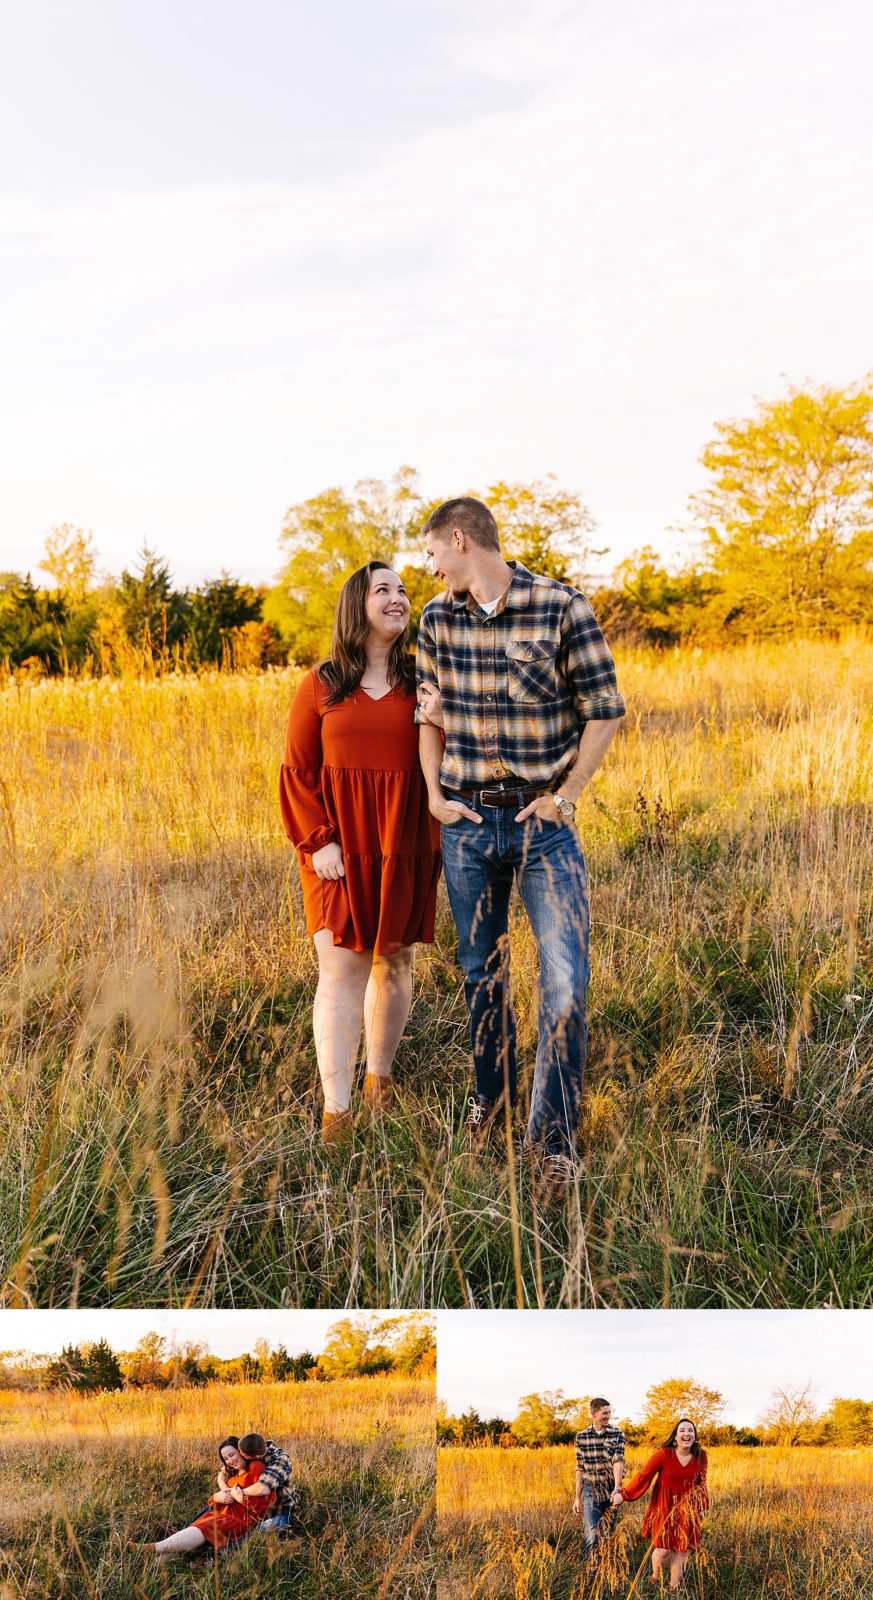 Man in plaid shirt and woman in red dress walking through a field during golden hour in Kansas City.